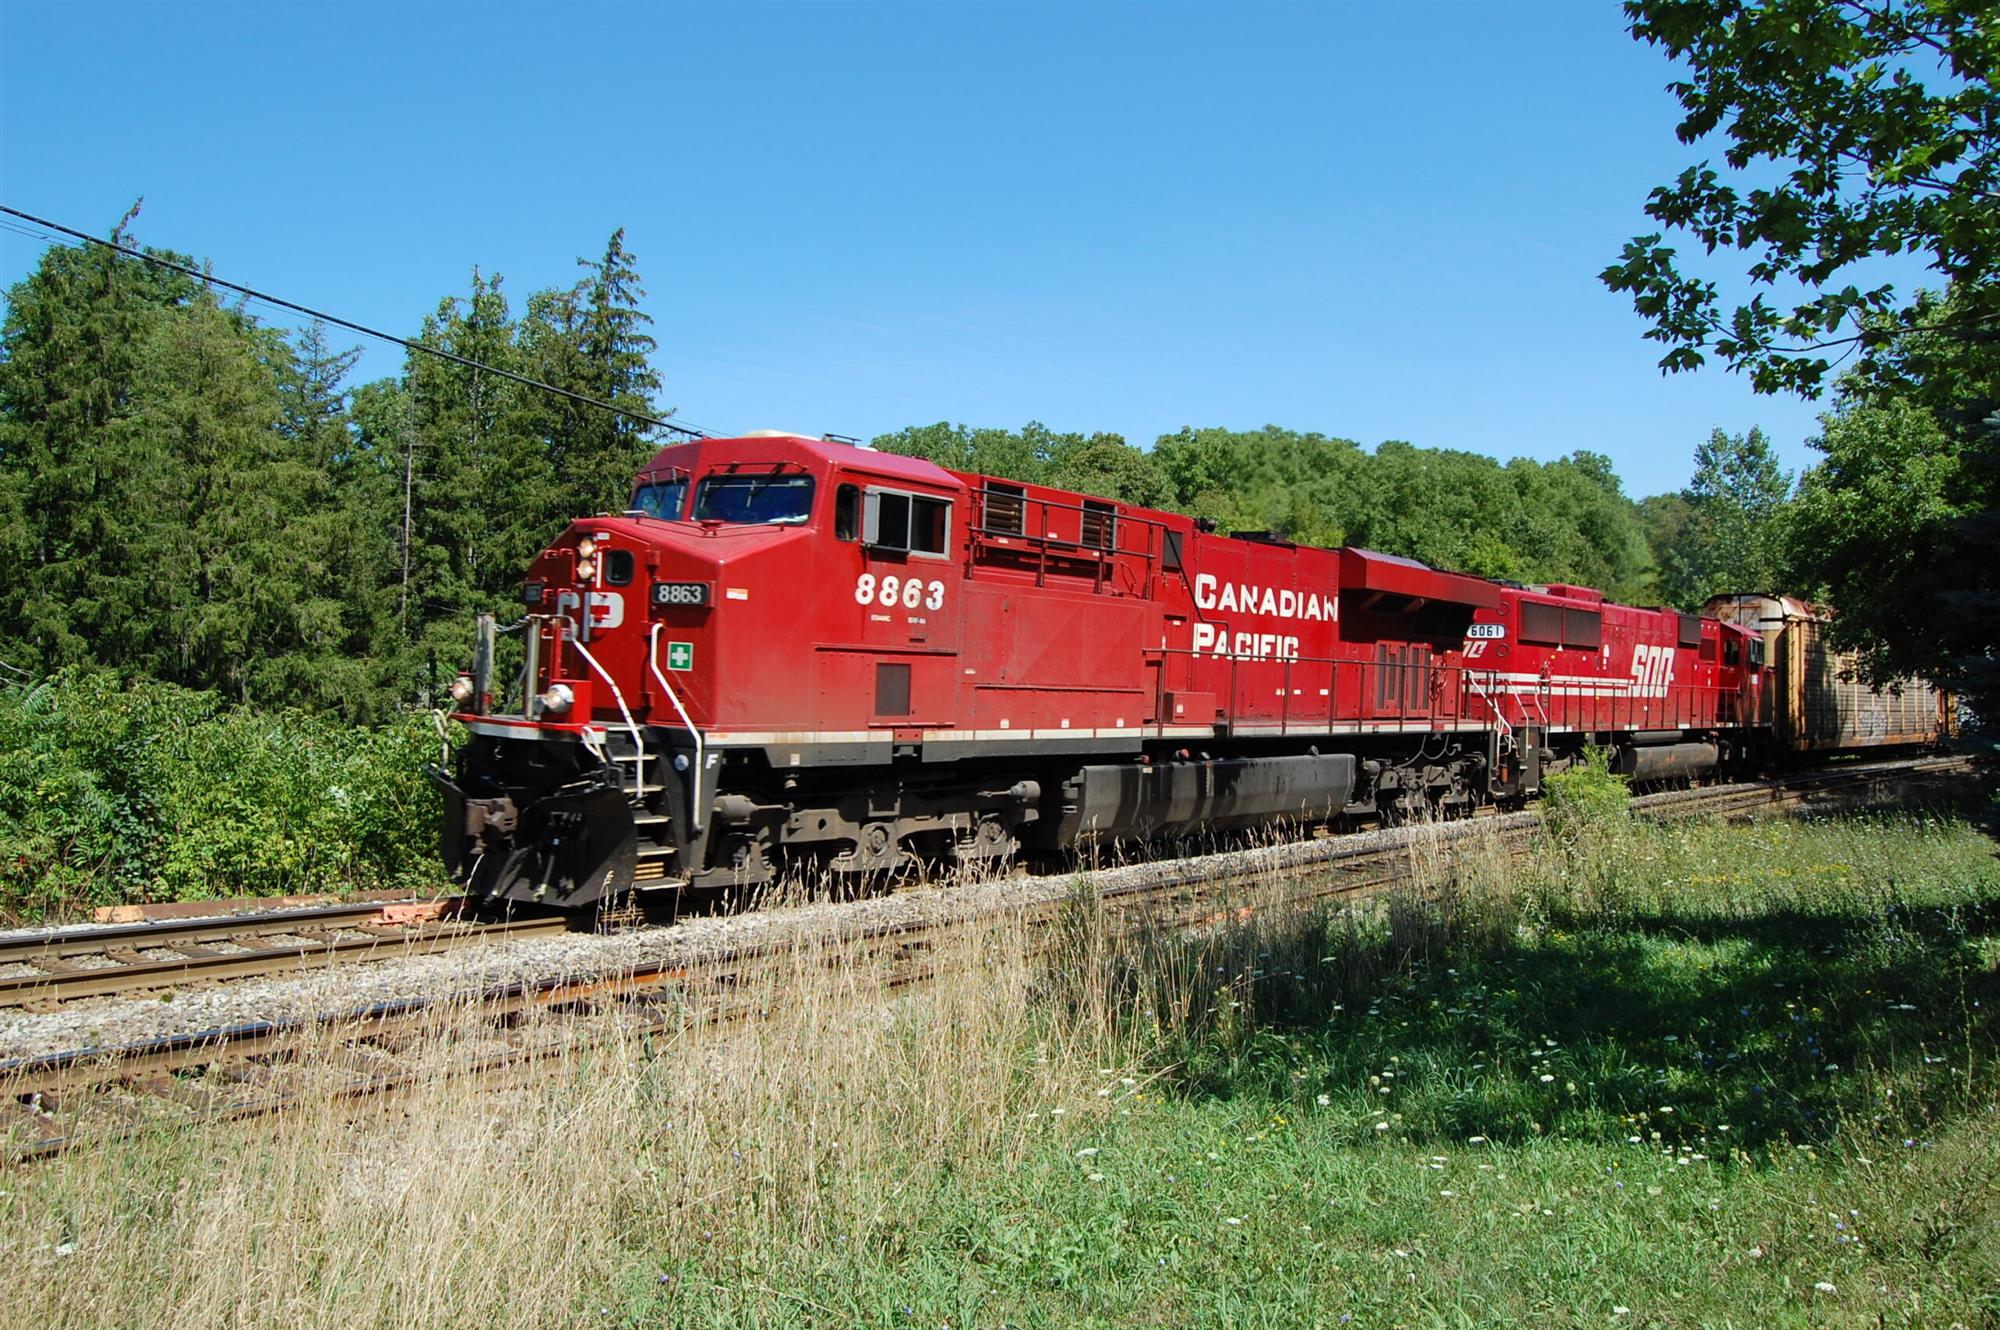 Self Photos / Files - Canadian-Pacific-locomotive-scaled